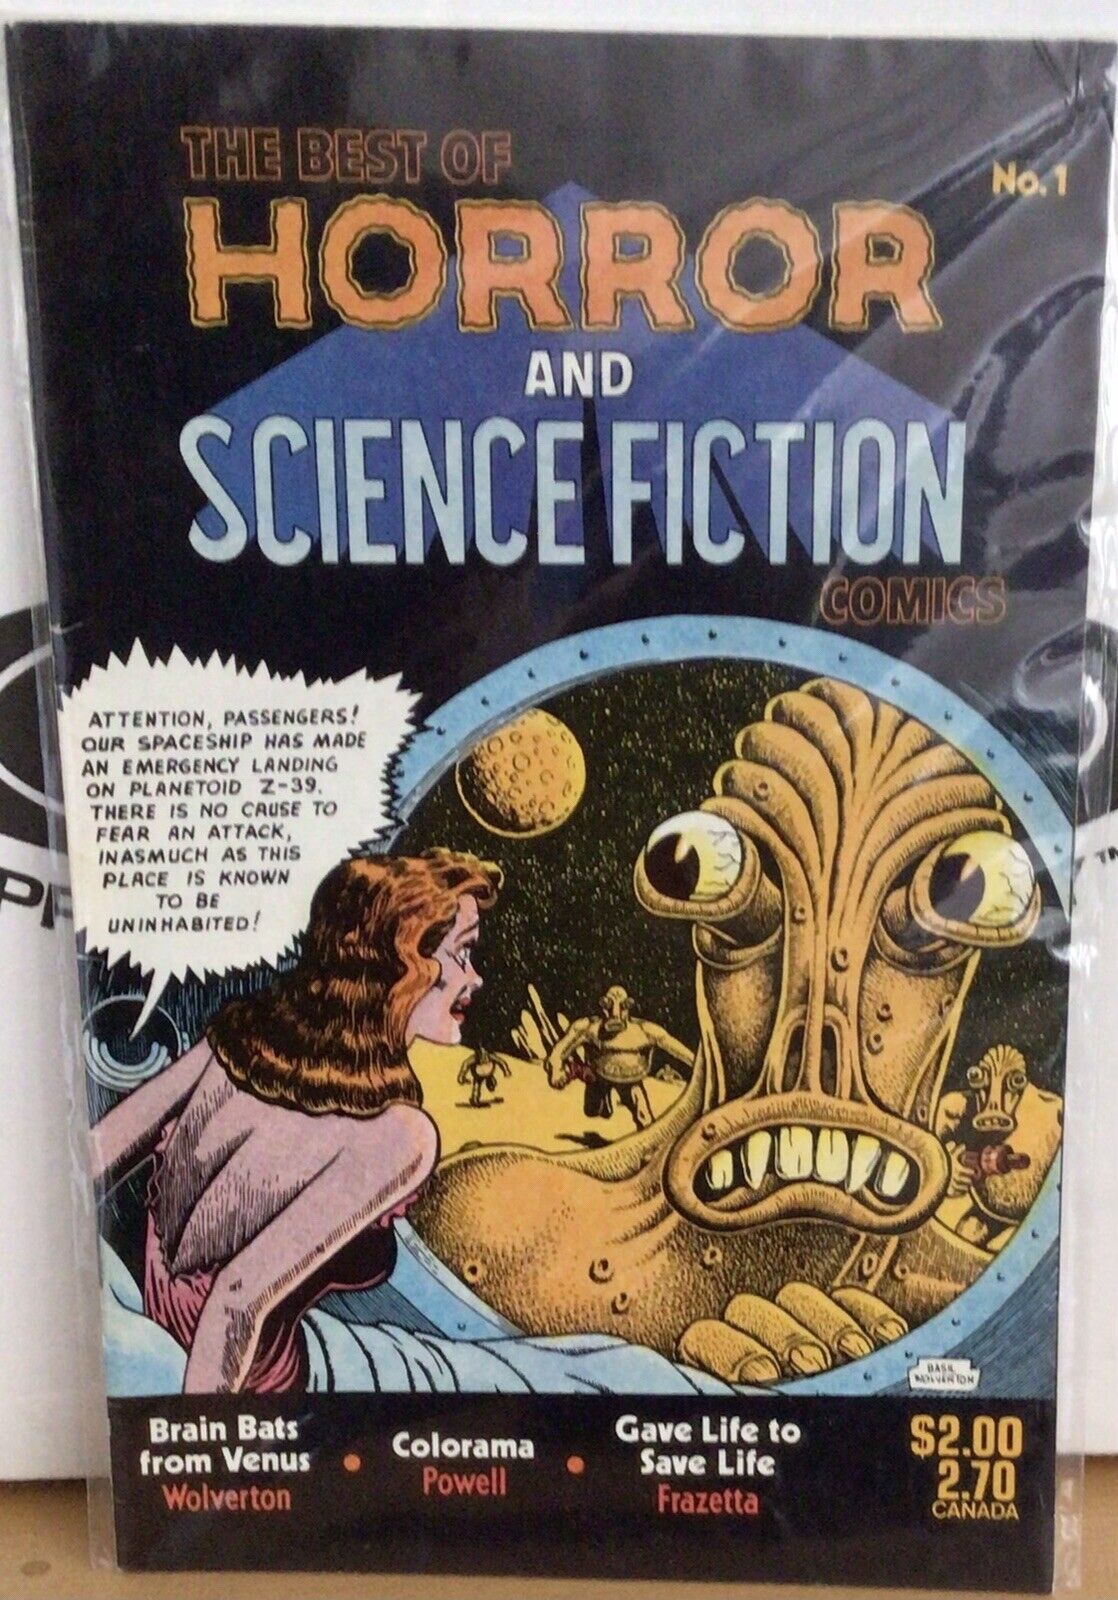 The Best Of Horror And Science Fiction Comics #1